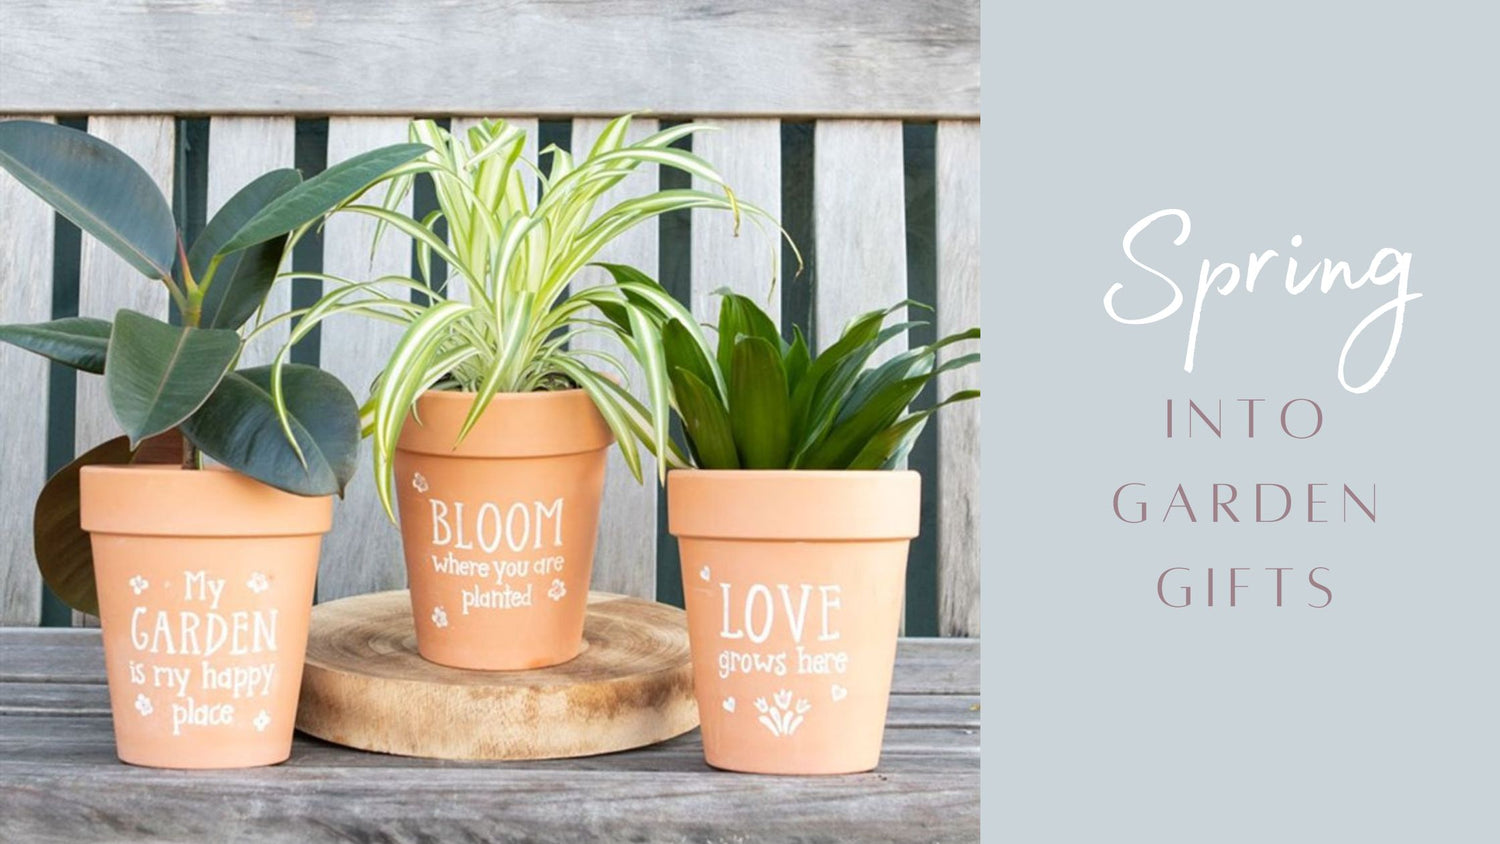 three terracotta plant pots advertising spring into garden gifts